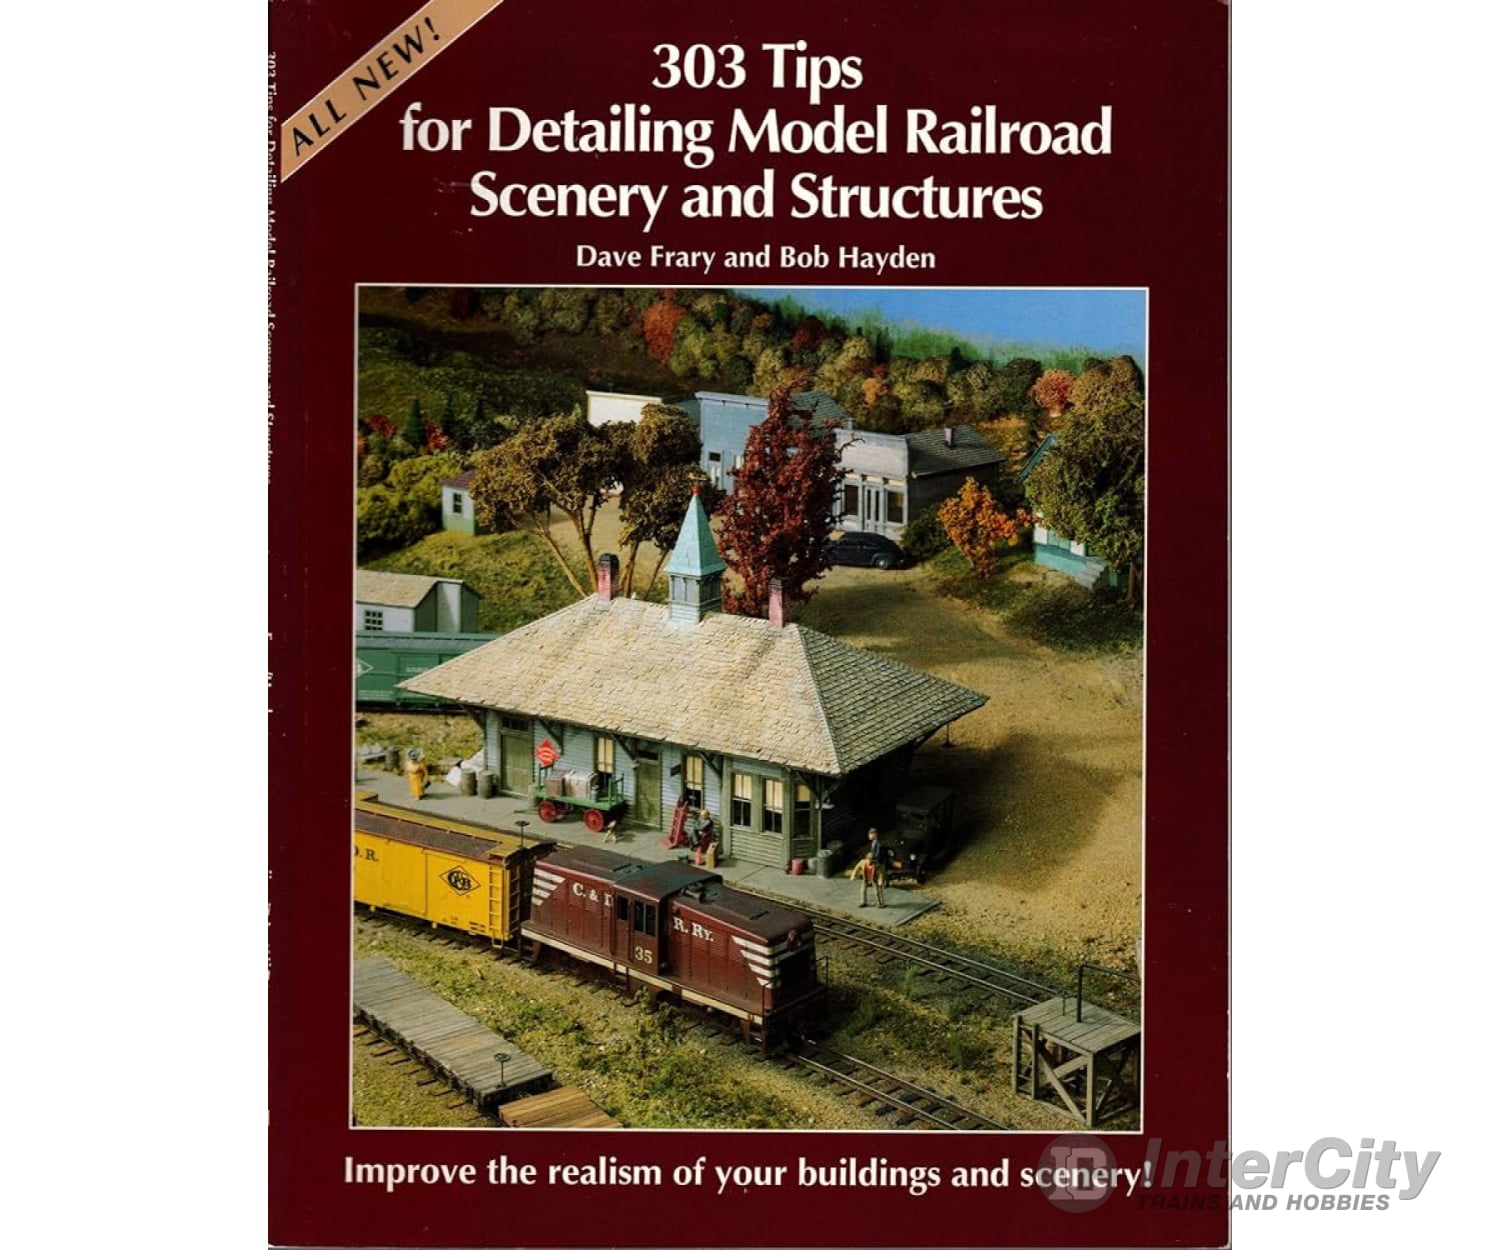 303 Tips For Detailing Model Railroad Scenery And Struk2 - 3Ctures By Dave Bob Frary & Hayden